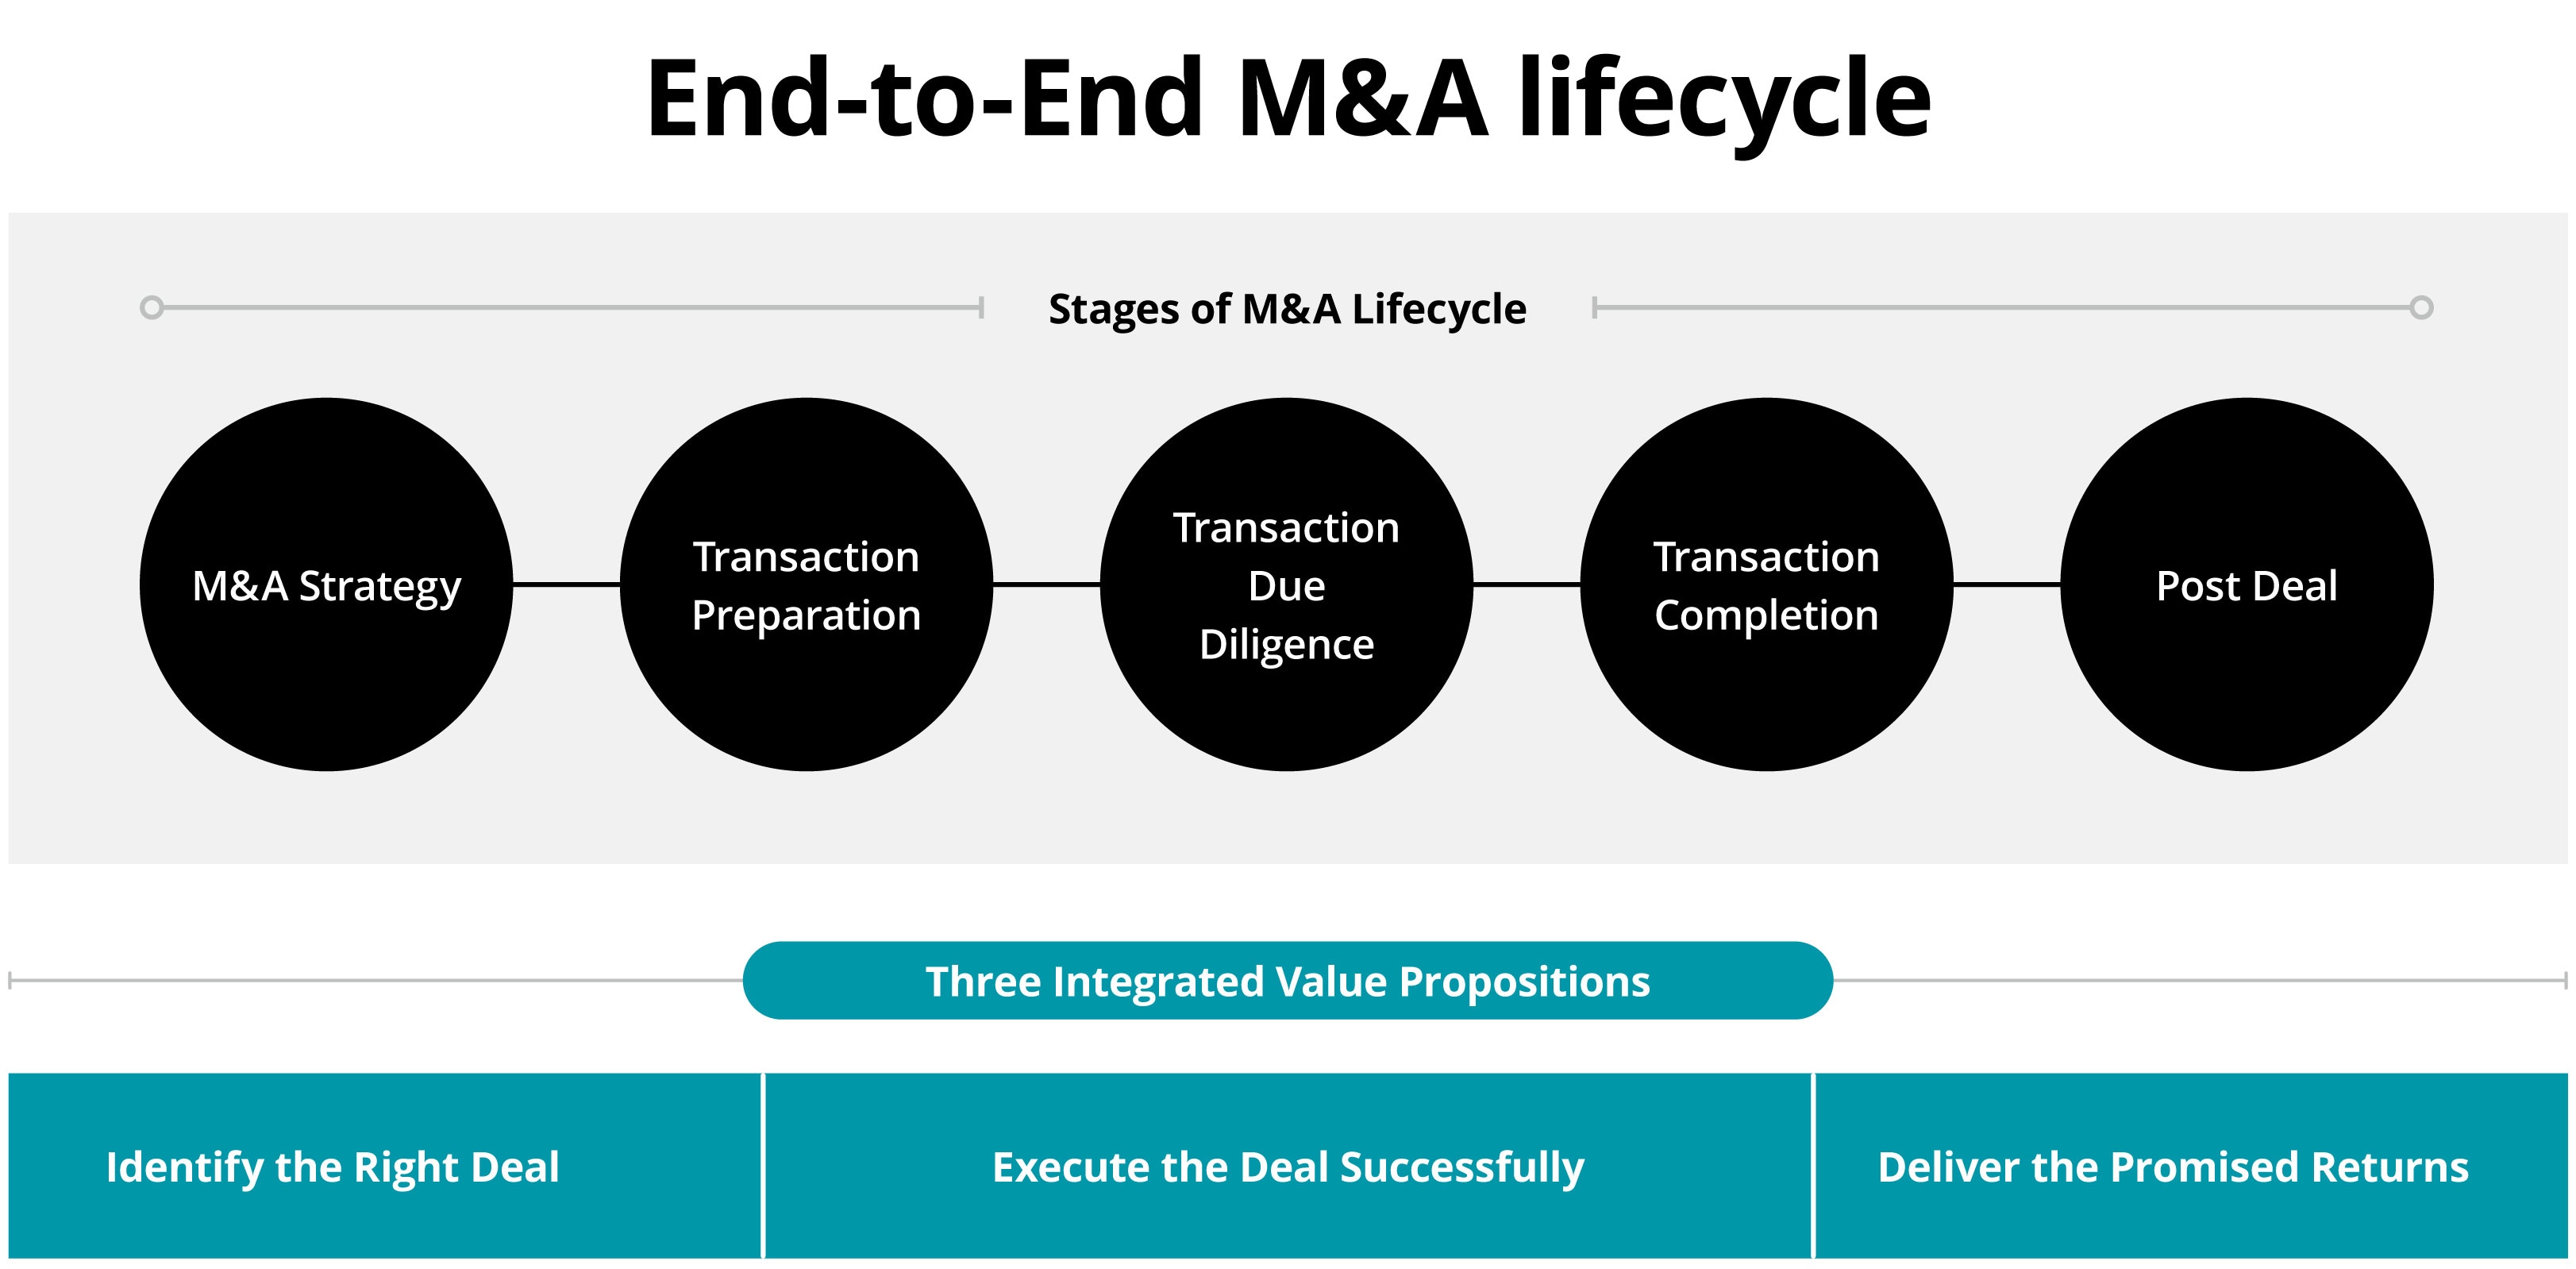 End-to-End M&A